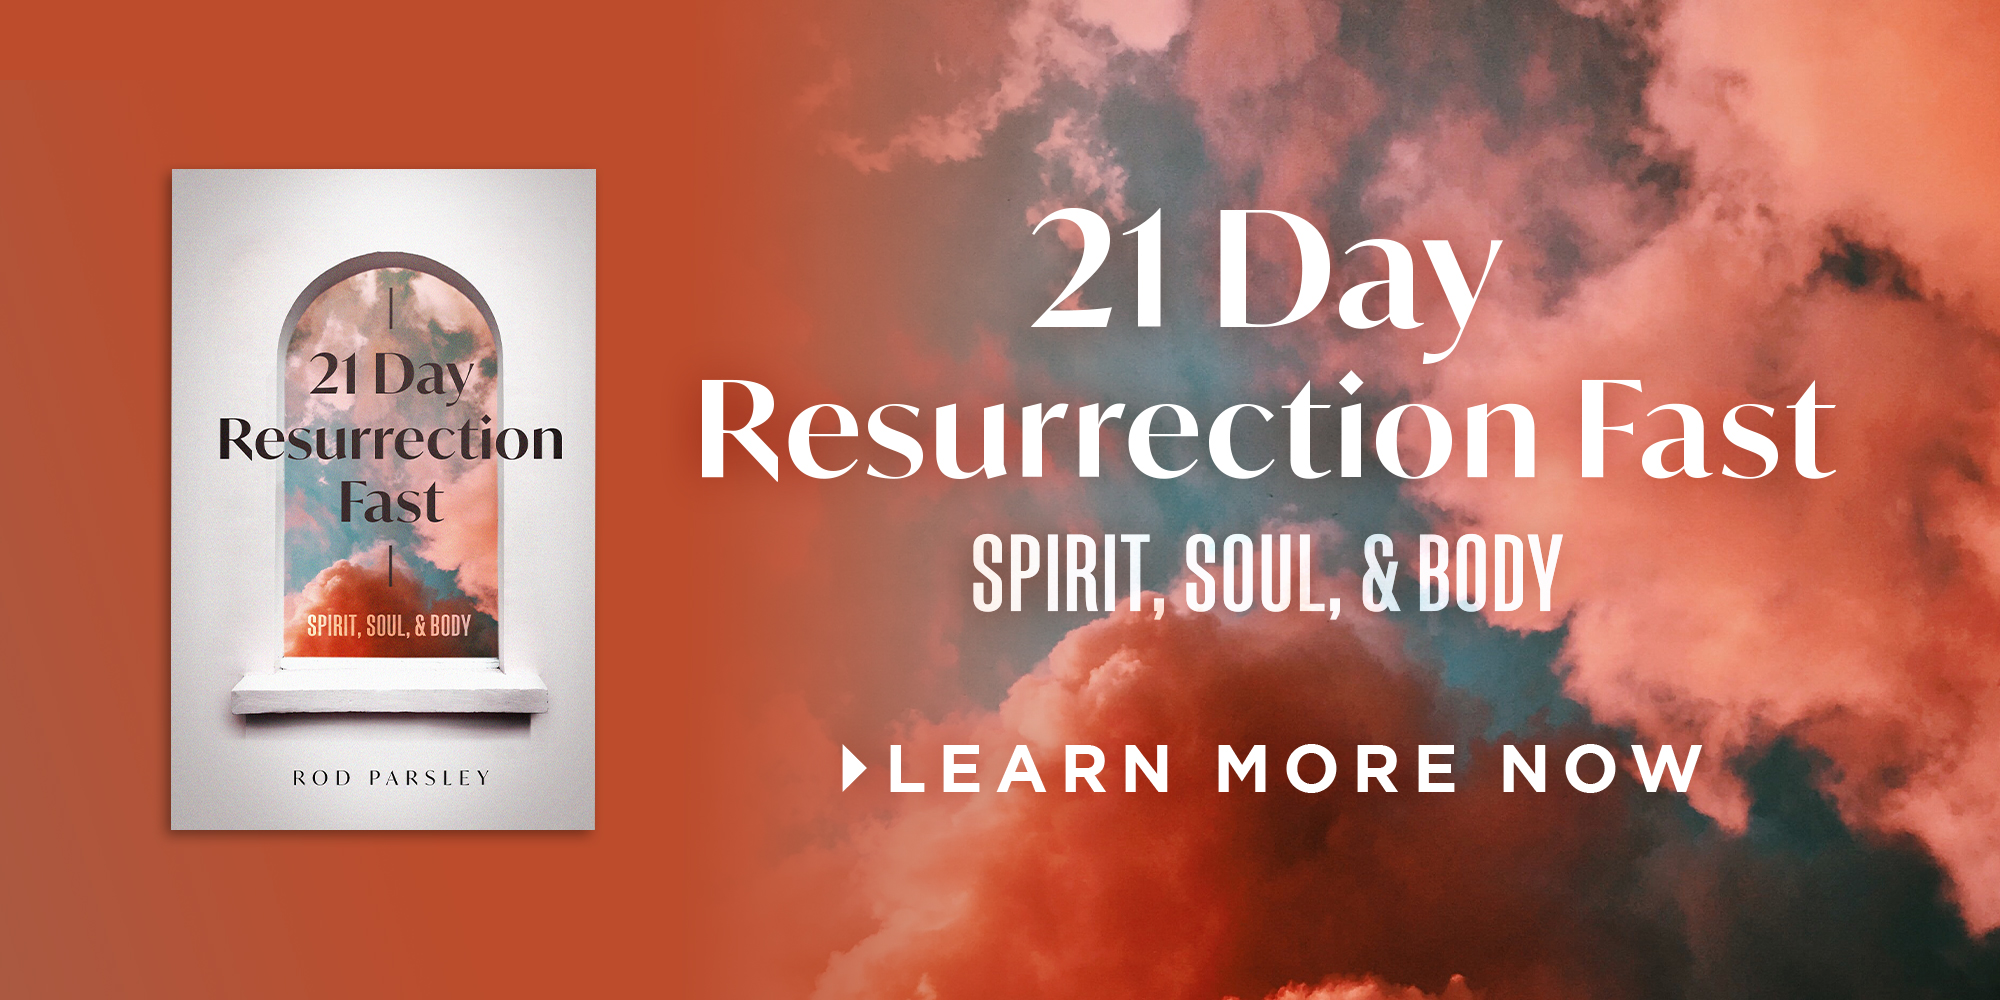 21 Day Resurrection Fast Spirit, Soul & Body Download Now